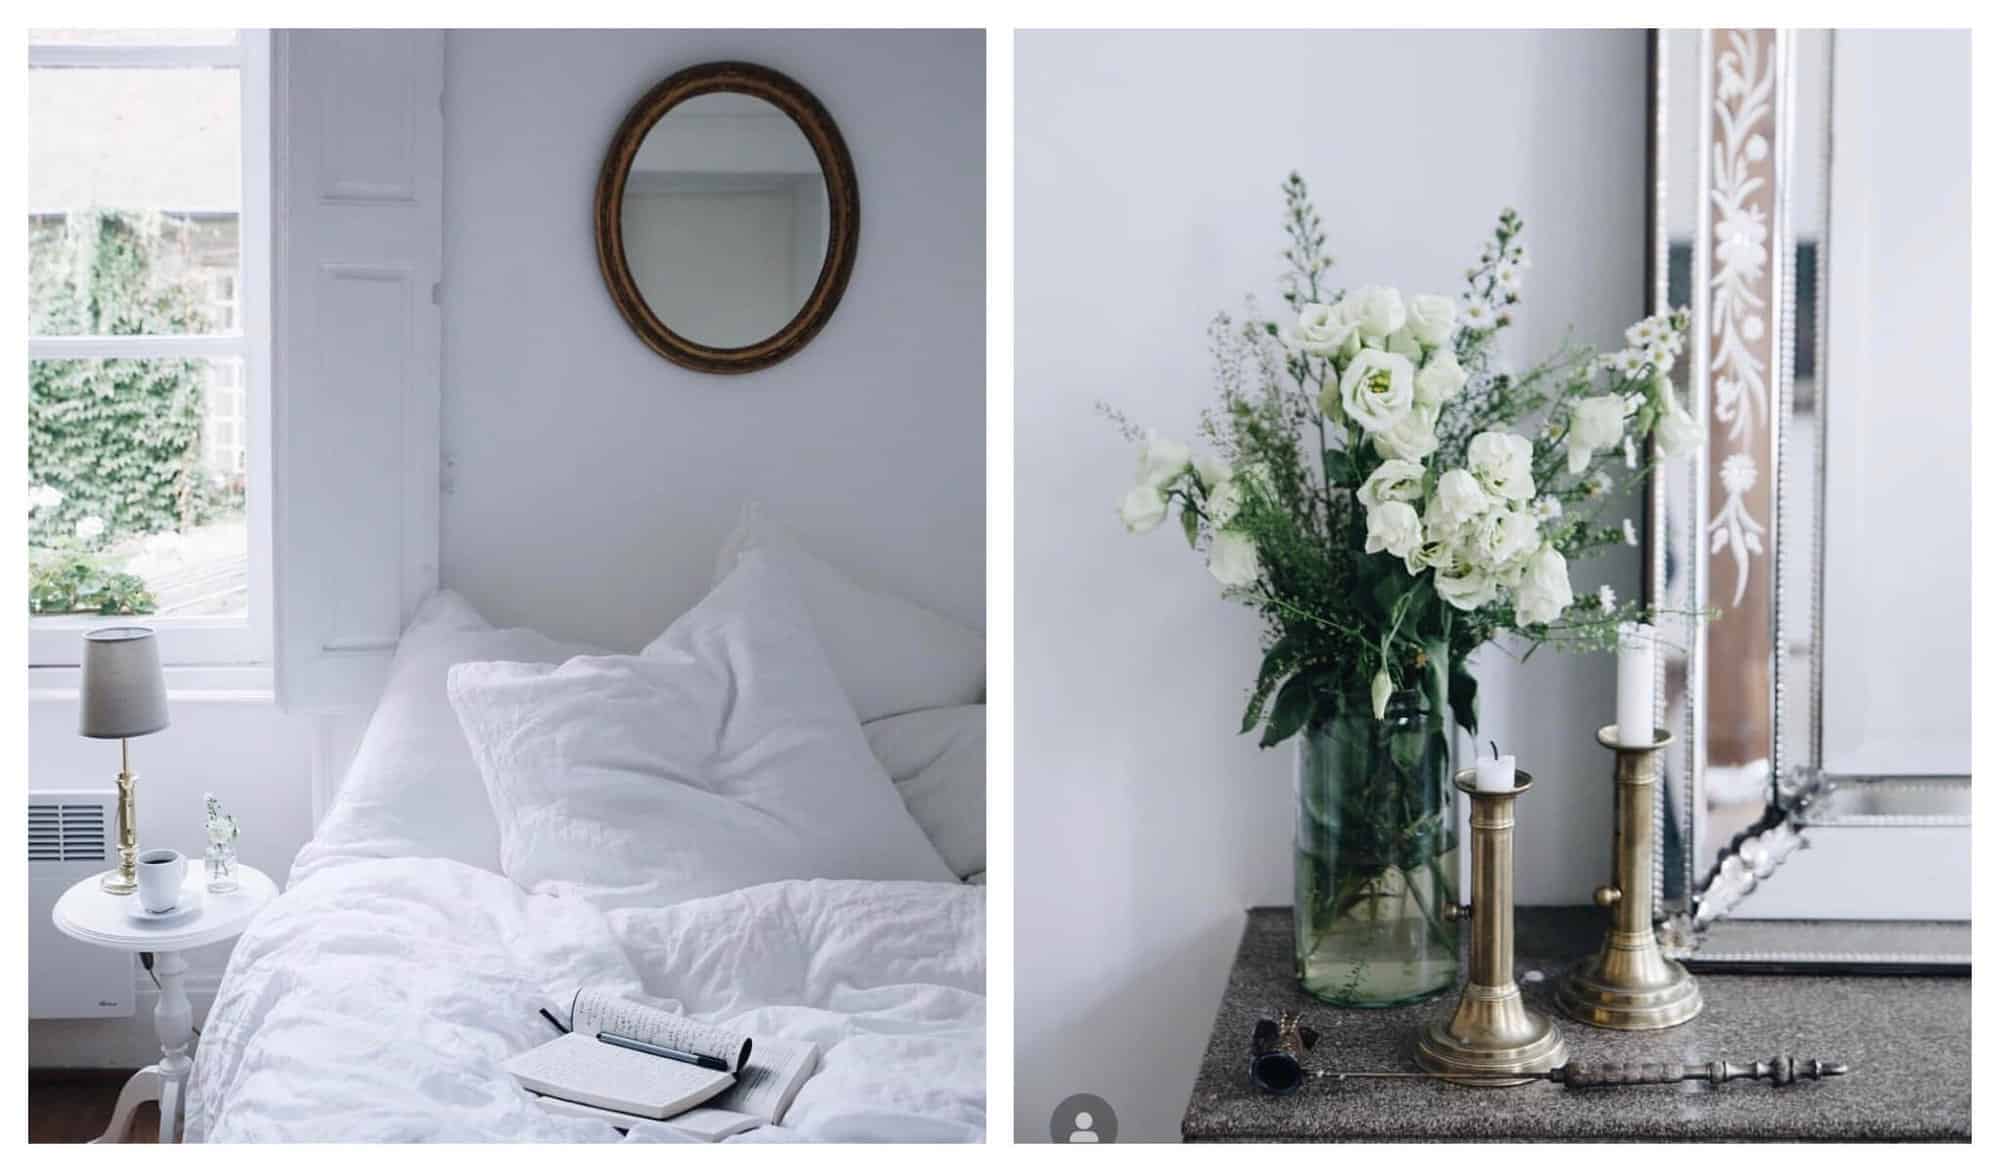 Left: A white linen-covered bed is pictured next to a light-filled window inside The Cook's Atelier's pied-à-terre. Right: Two brass candle holders are sat to the right of a vase filled with white flowers. 